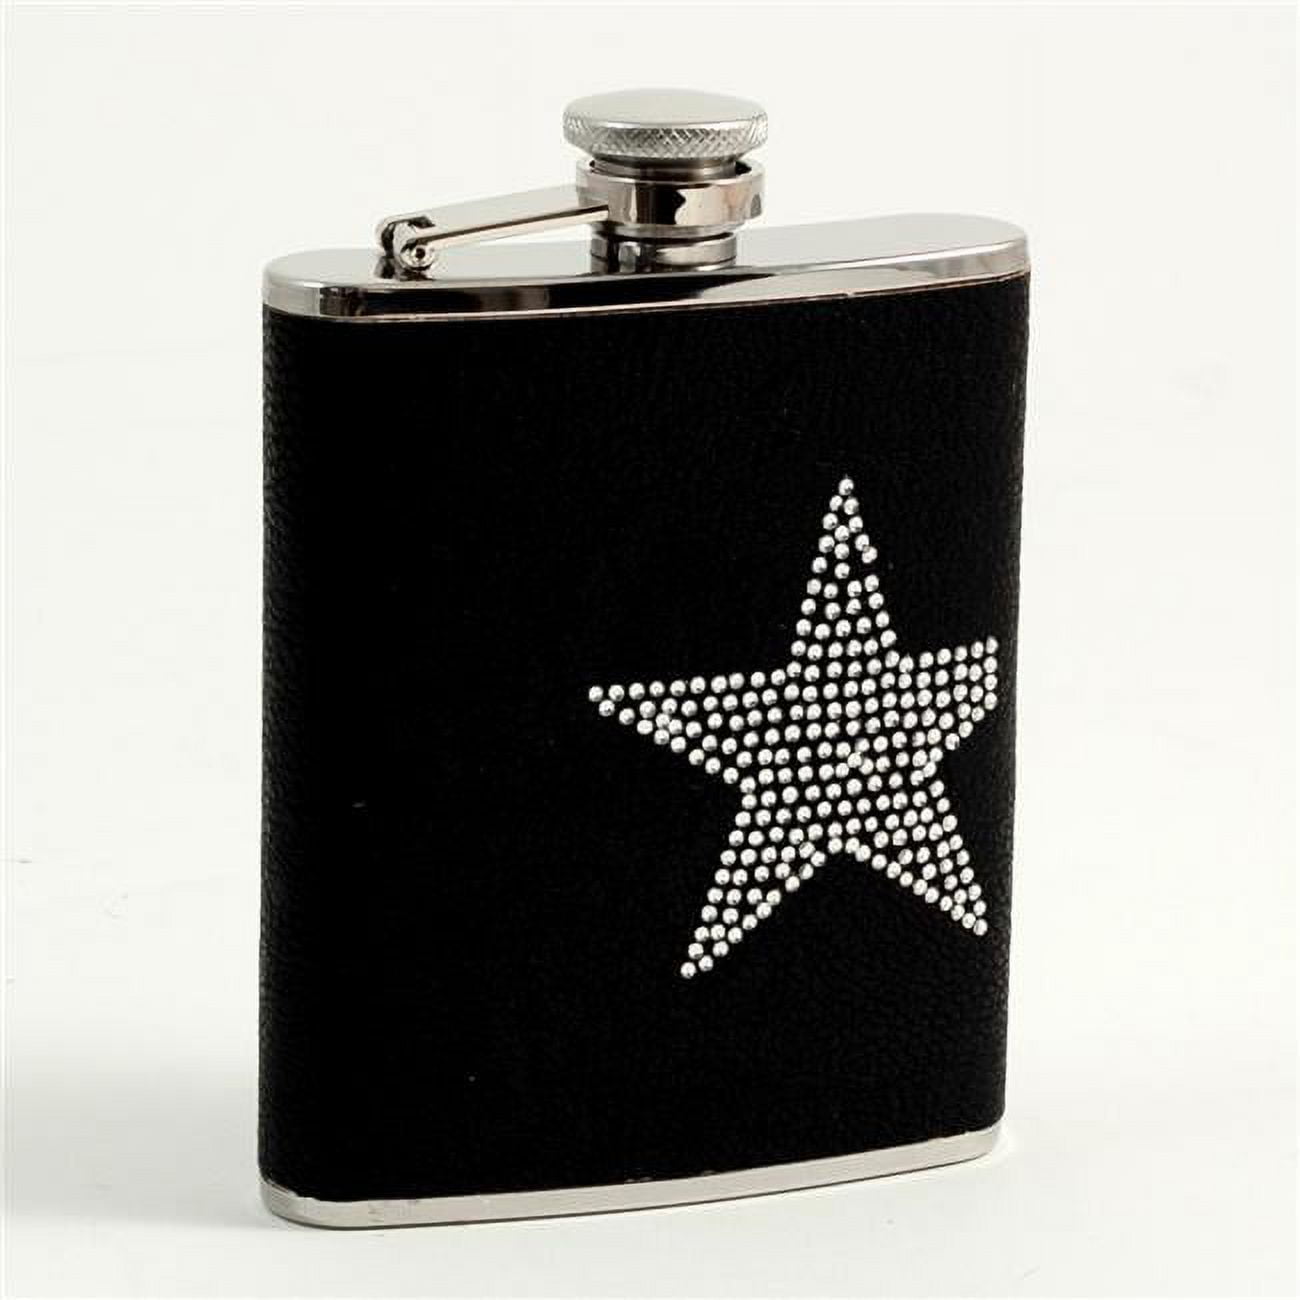 Bey-berk International 6 Oz Stainless Steel Leatherette Flask With Reign Stone Star Design Captive Cap & Durable Rubber Seal - Black & Silver